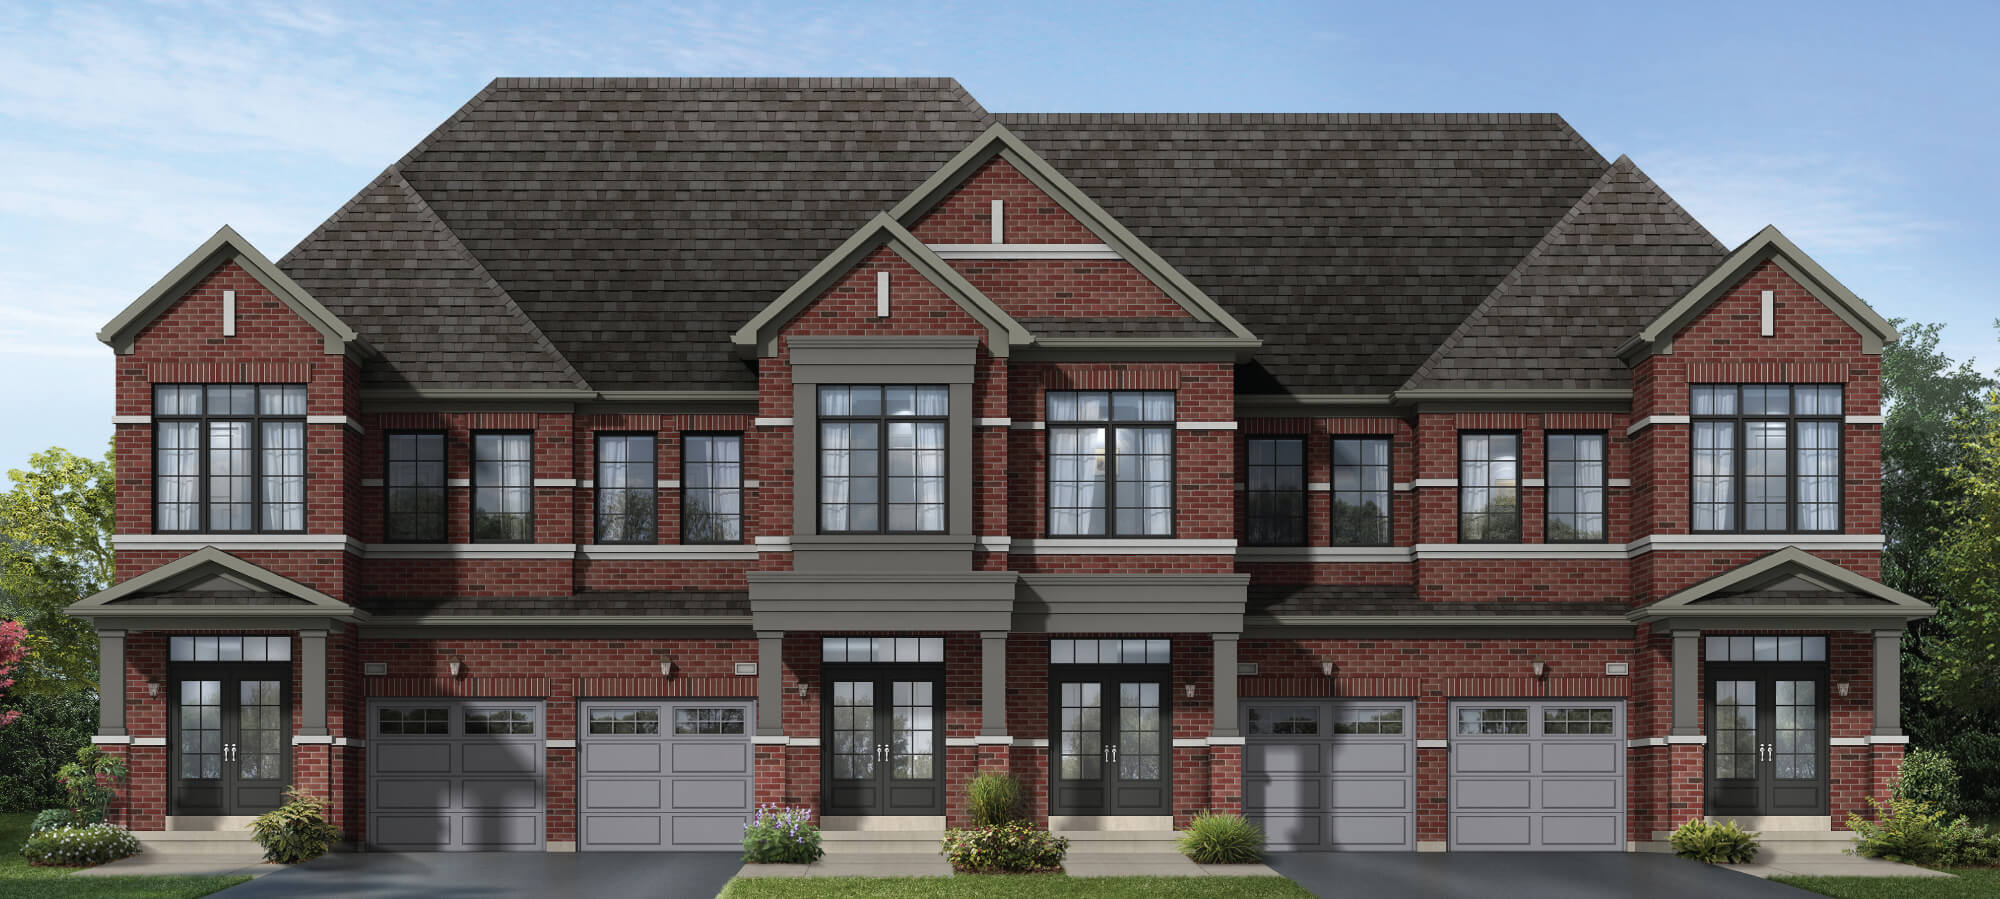 Townhomes - Classic Elev A